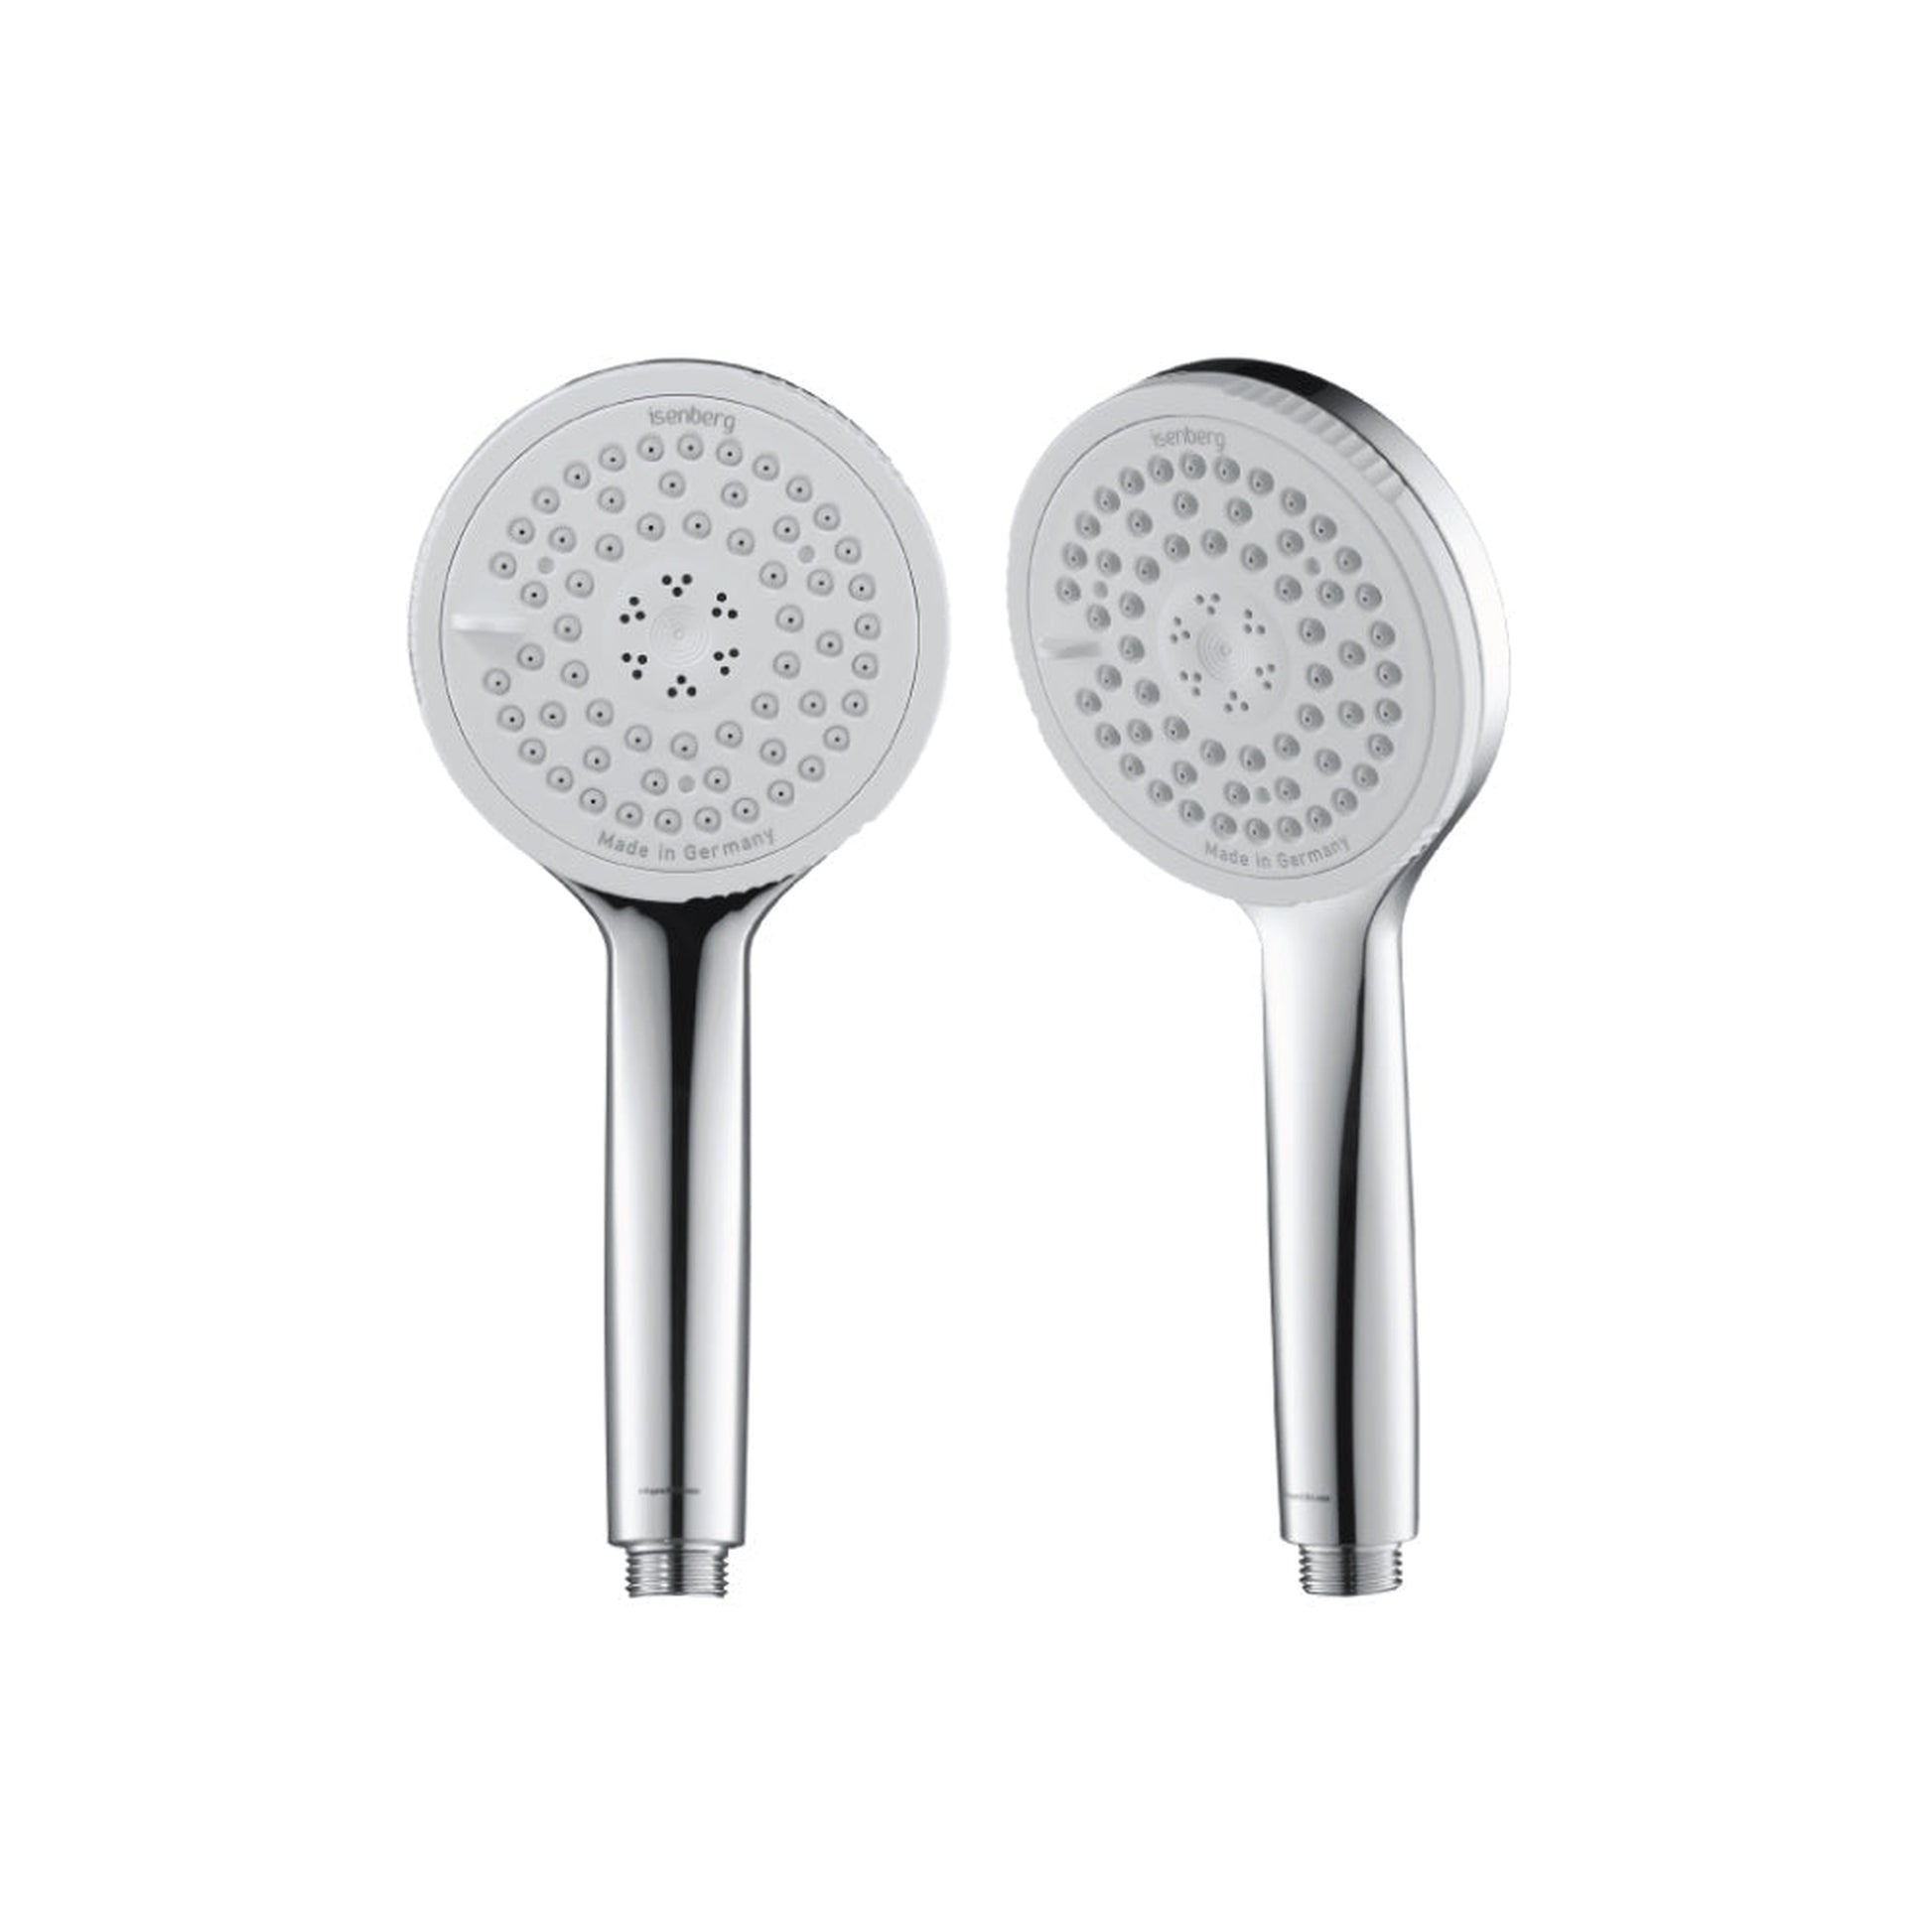 Isenberg Universal Fixtures Multi-Function ABS Hand Held Shower Head in Chrome (HS6170CP)